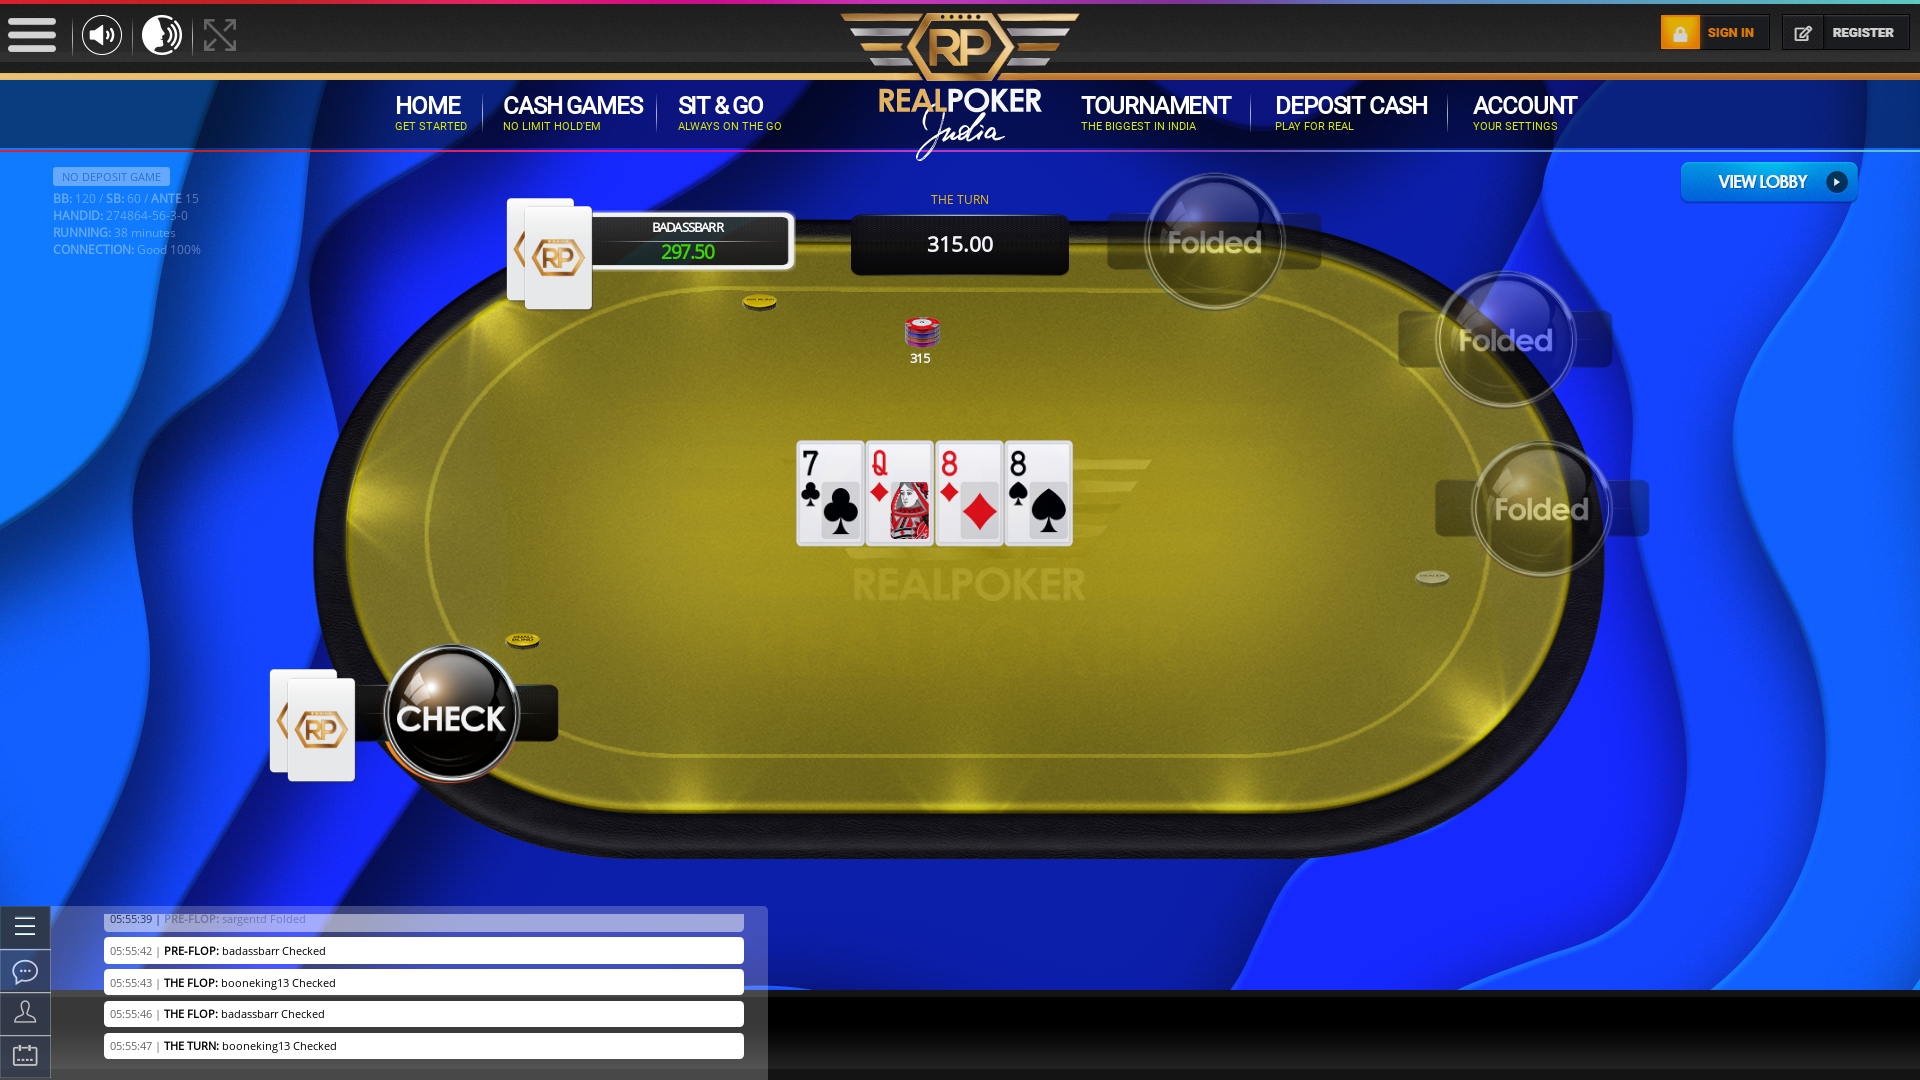 Real poker on a 10 player table in the 38th minute of the game